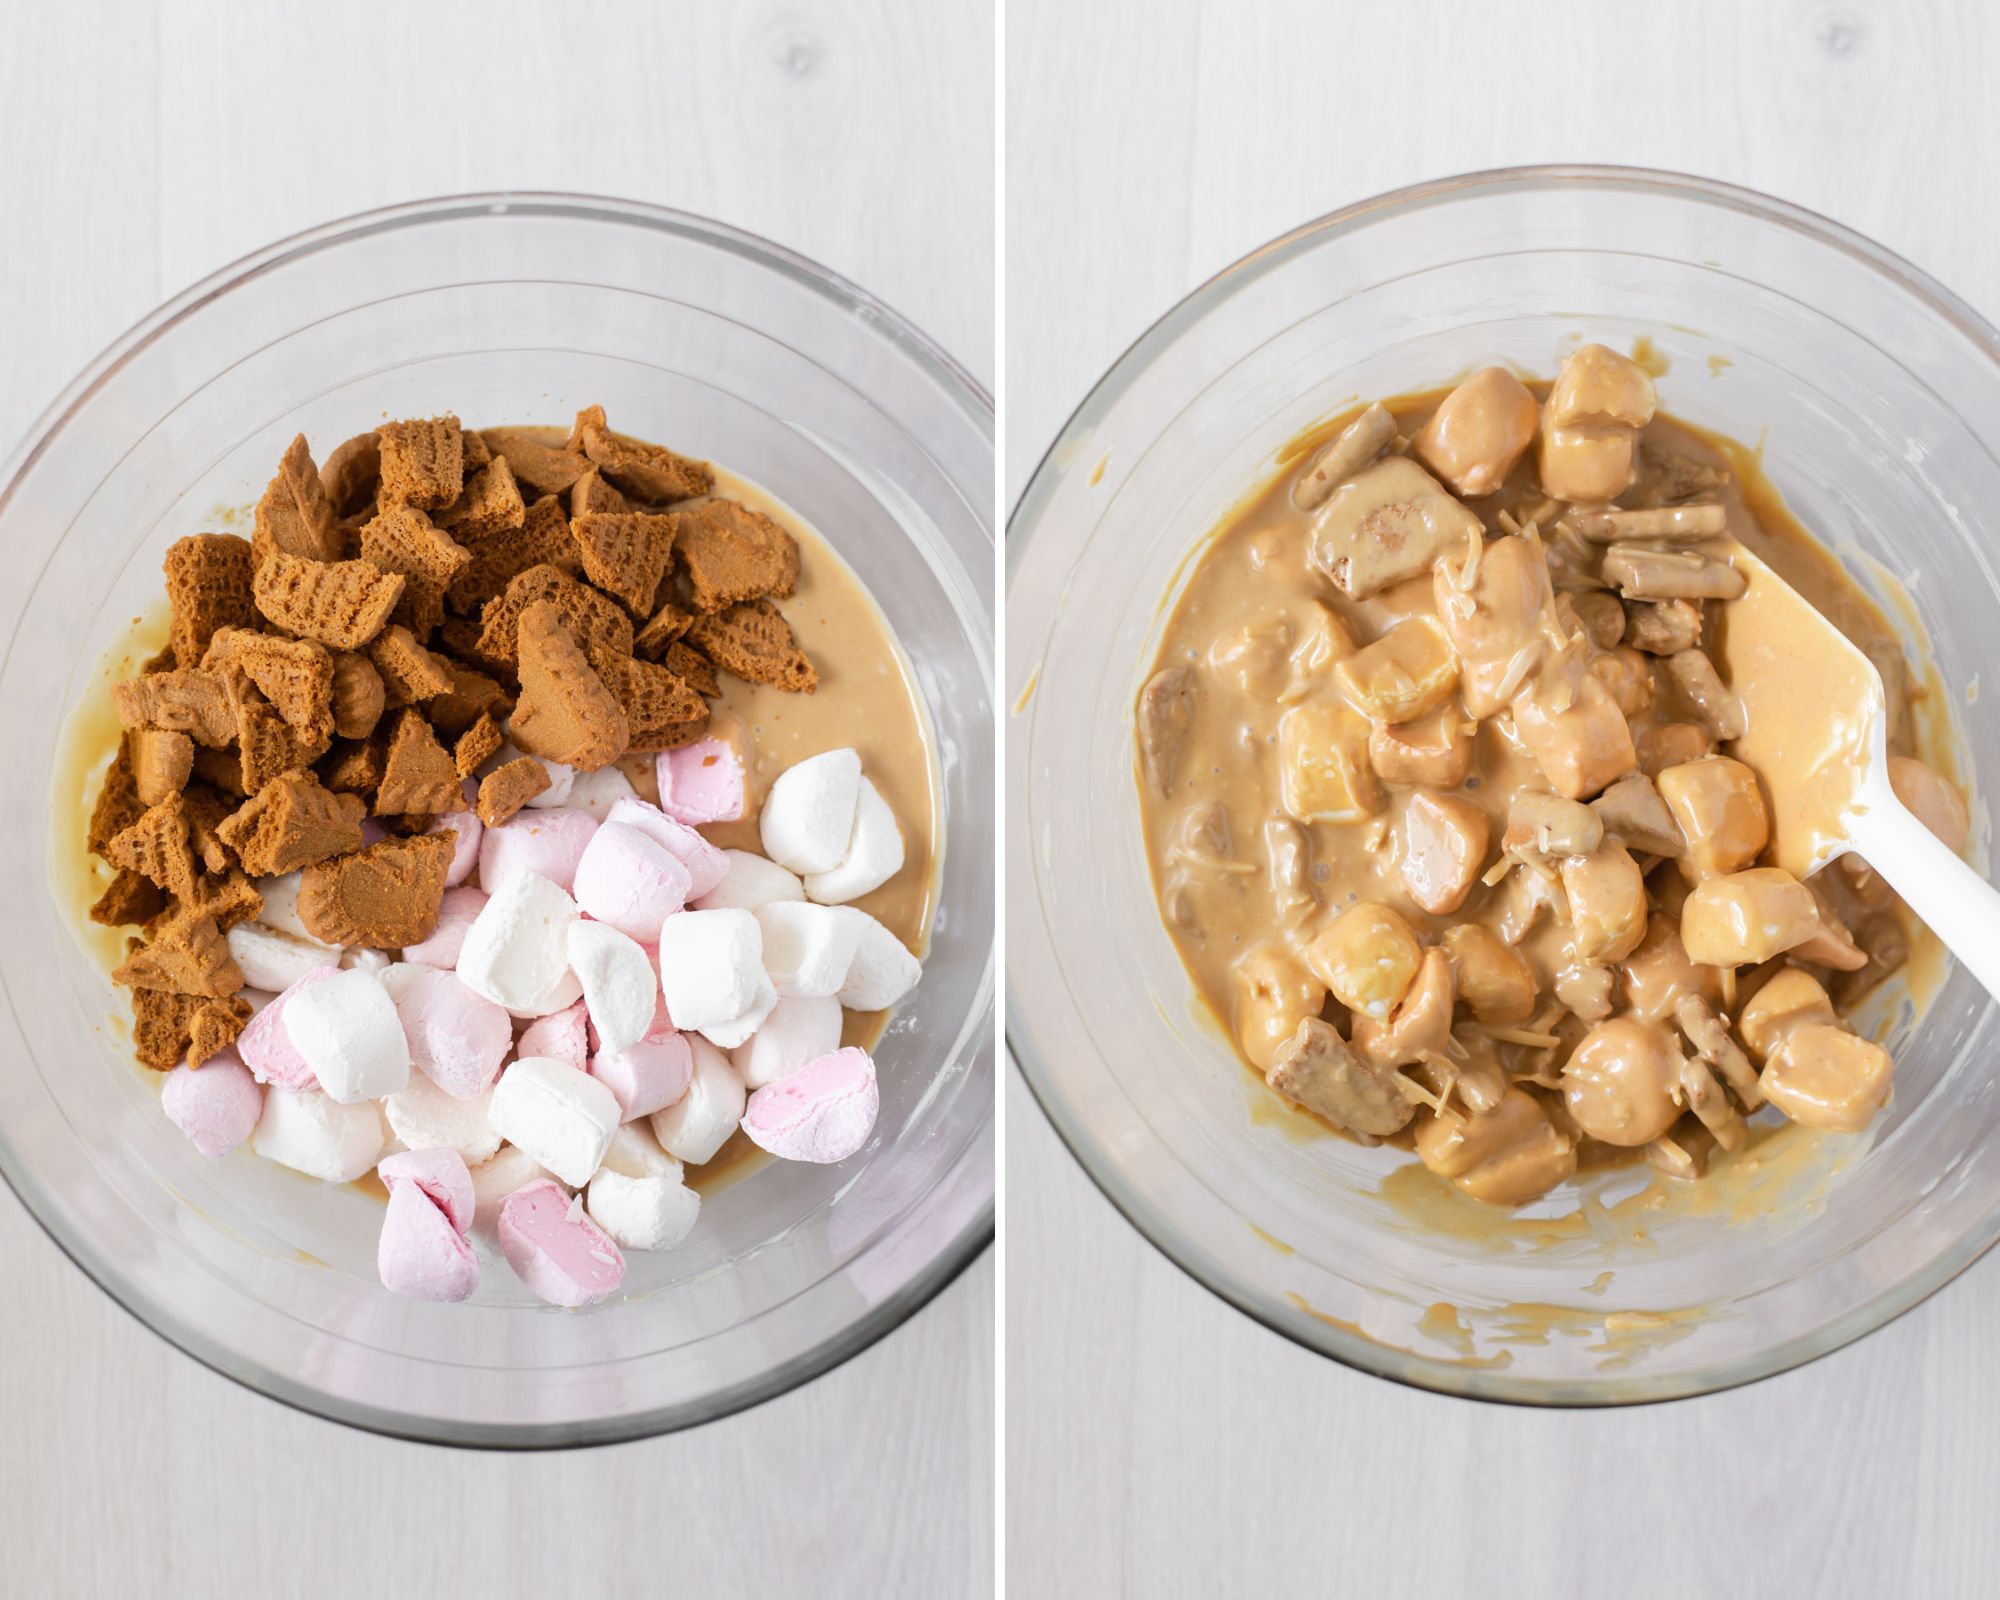 Mixing cut marshmallows and broken Biscoff biscuits into melted chocolate and Biscoff spread mixture until coated well.